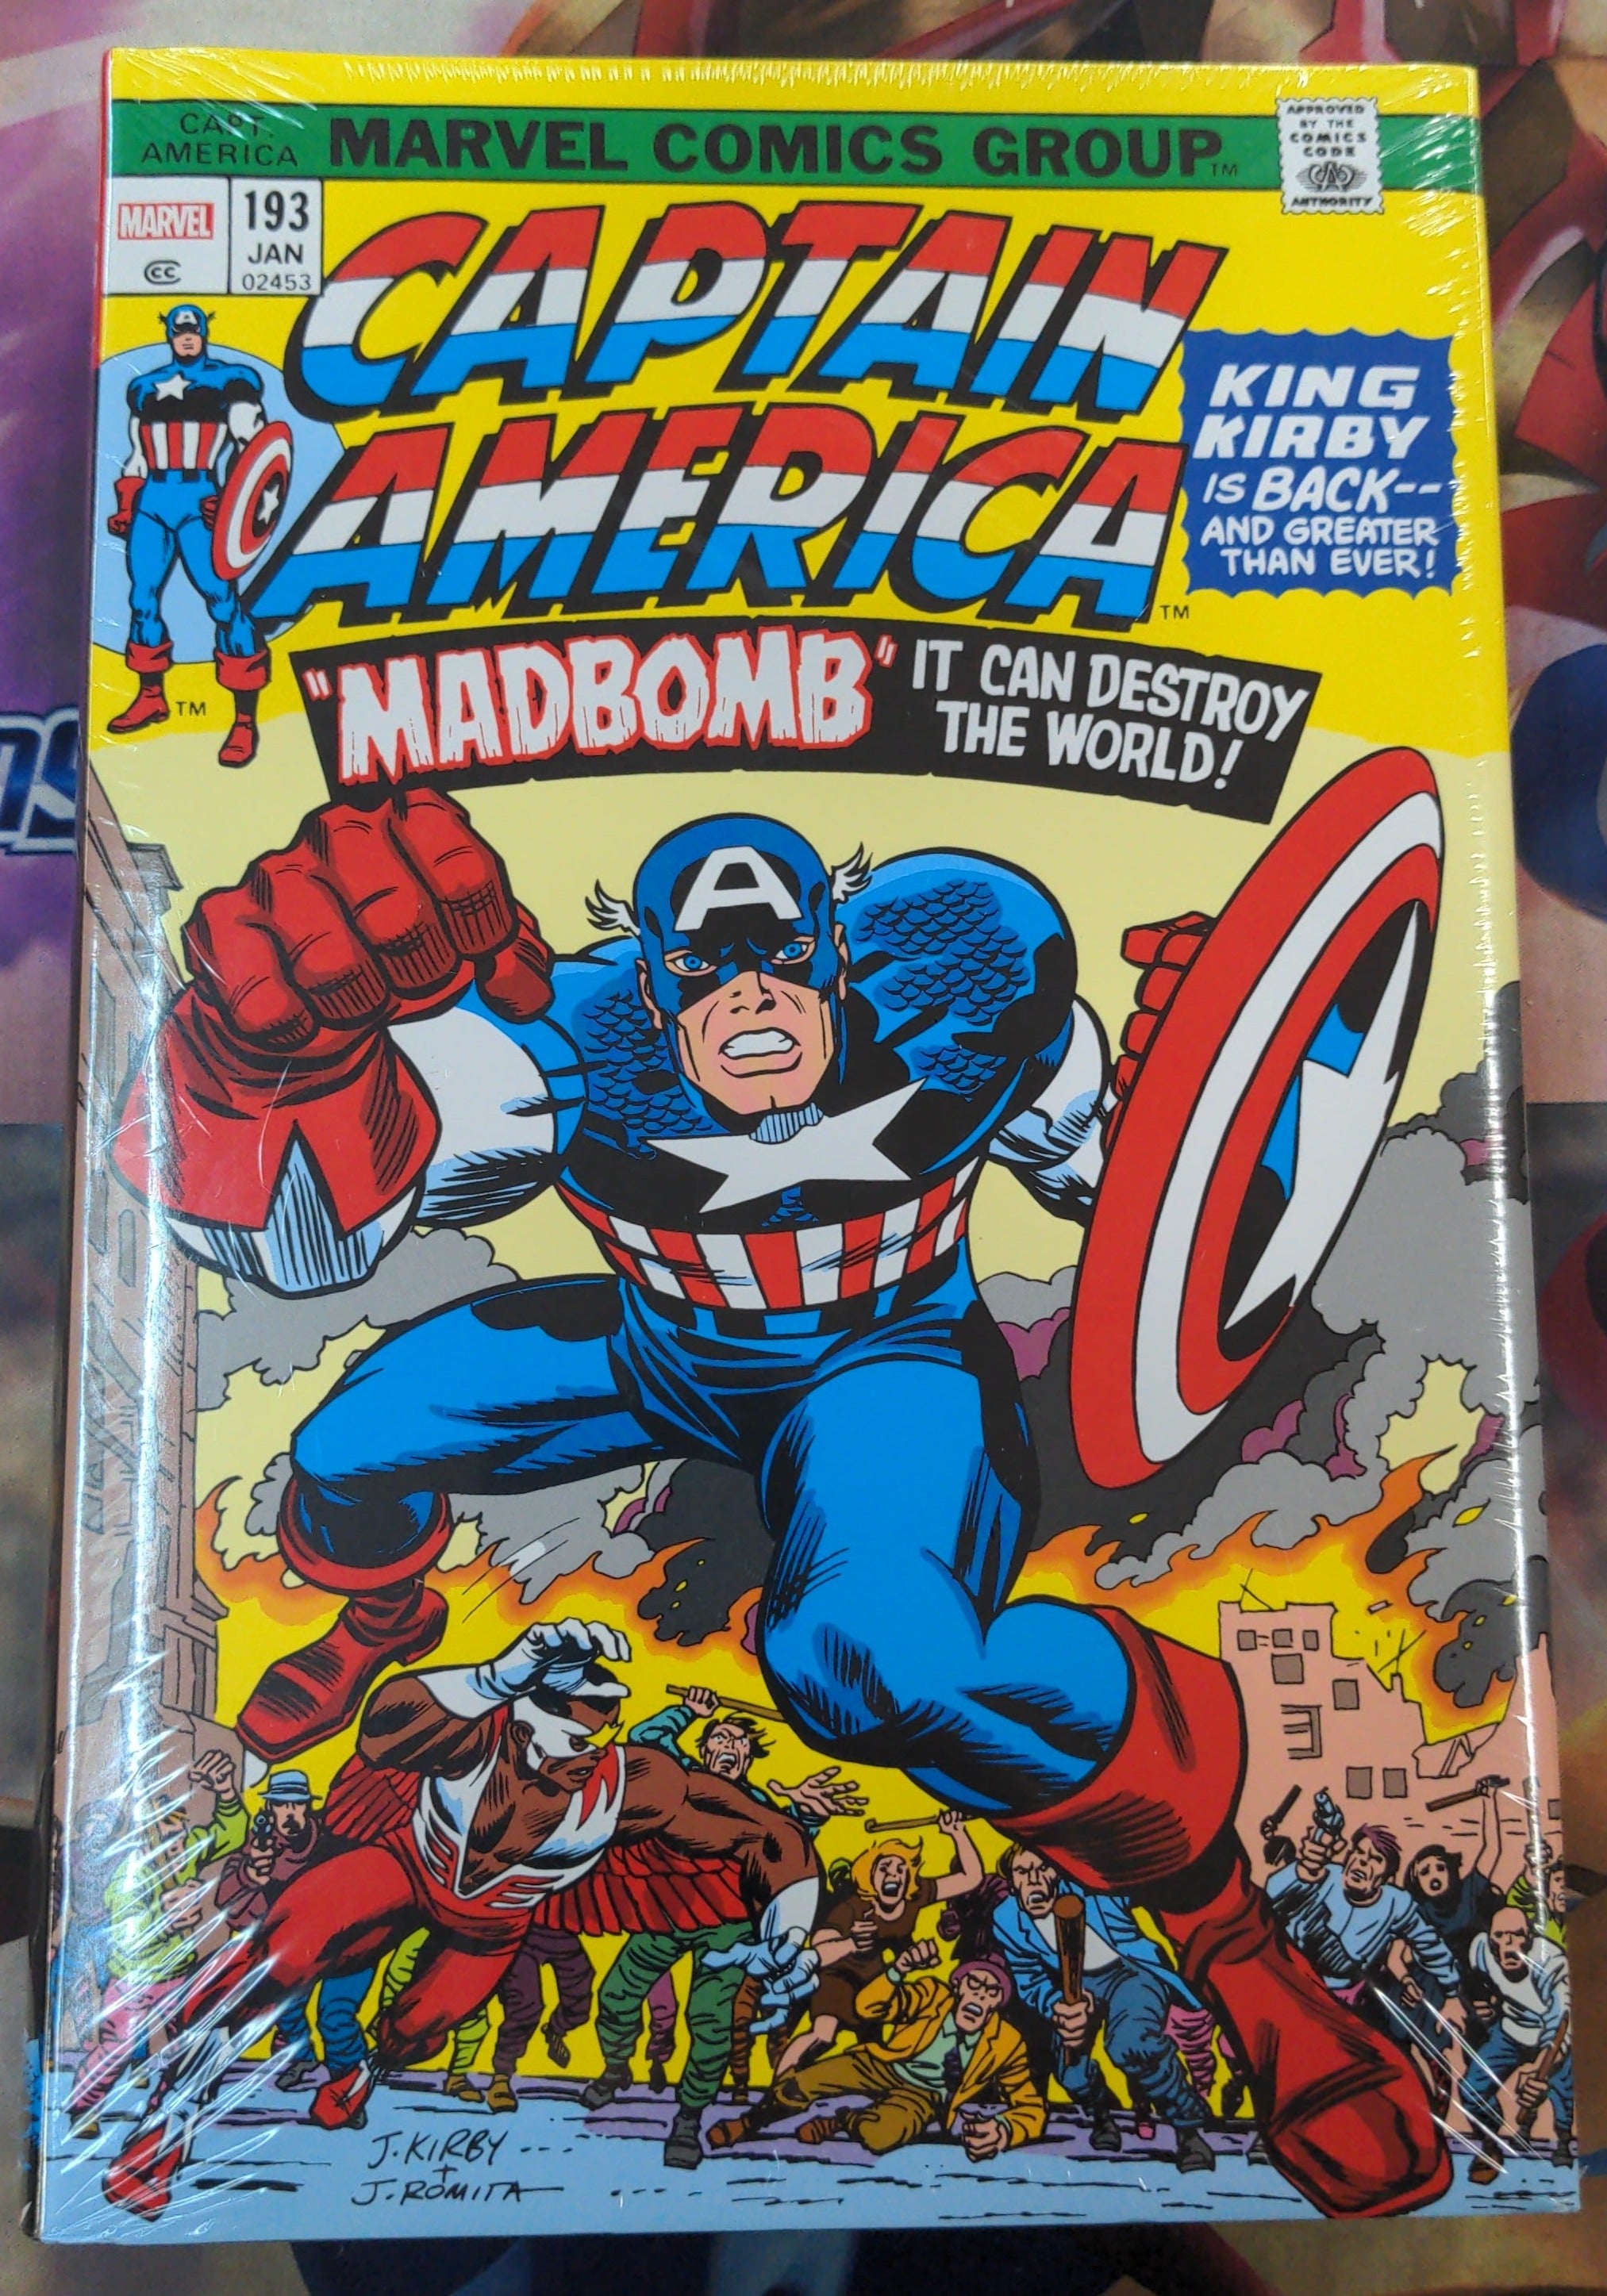 Captain America By Jack Kirby omnibus Hardcover Madbomb Cover New Printing | BD Cosmos